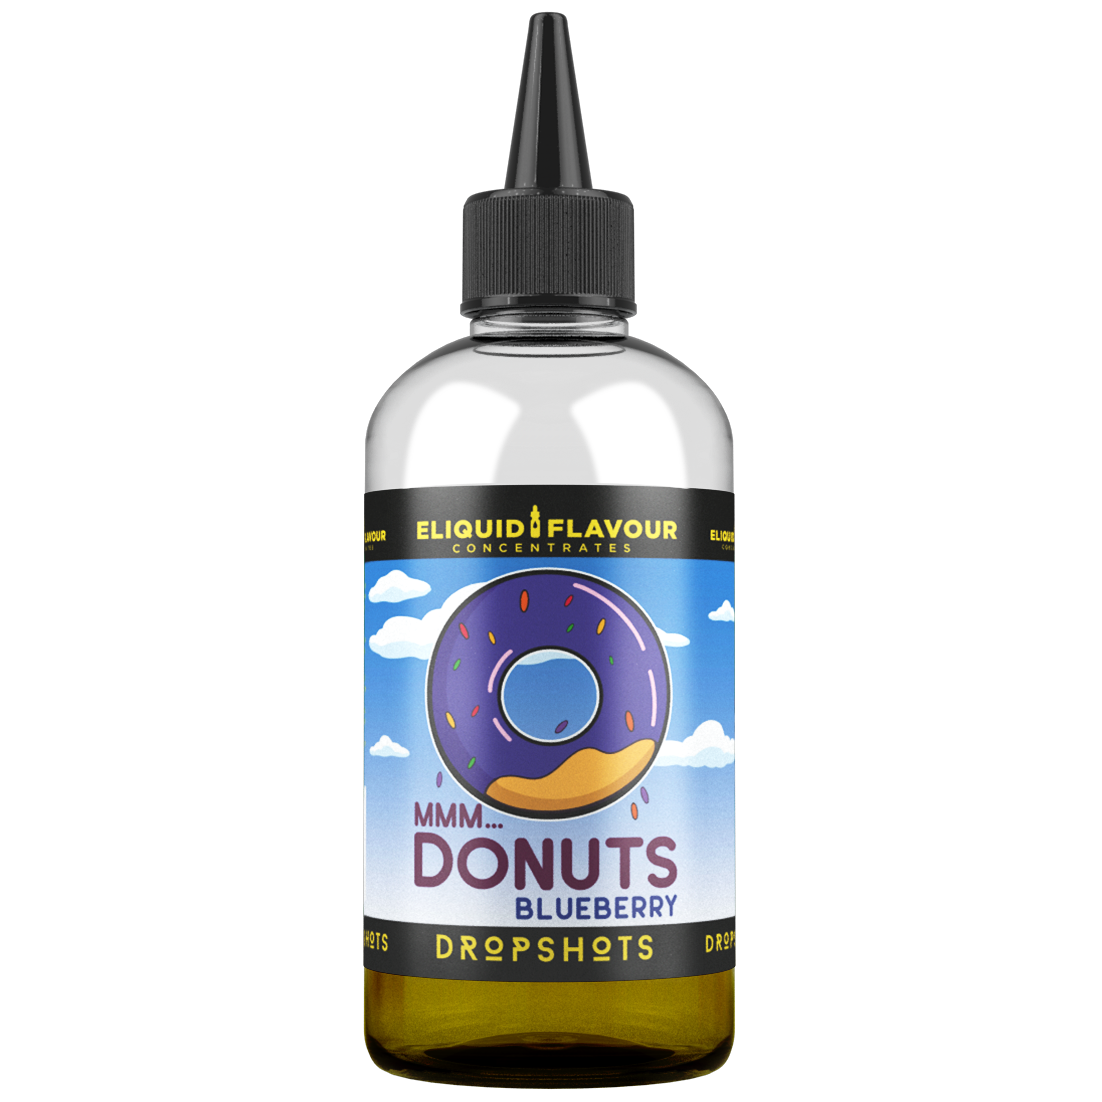 Mmm... Donuts - Blueberry DropShot by ELFC